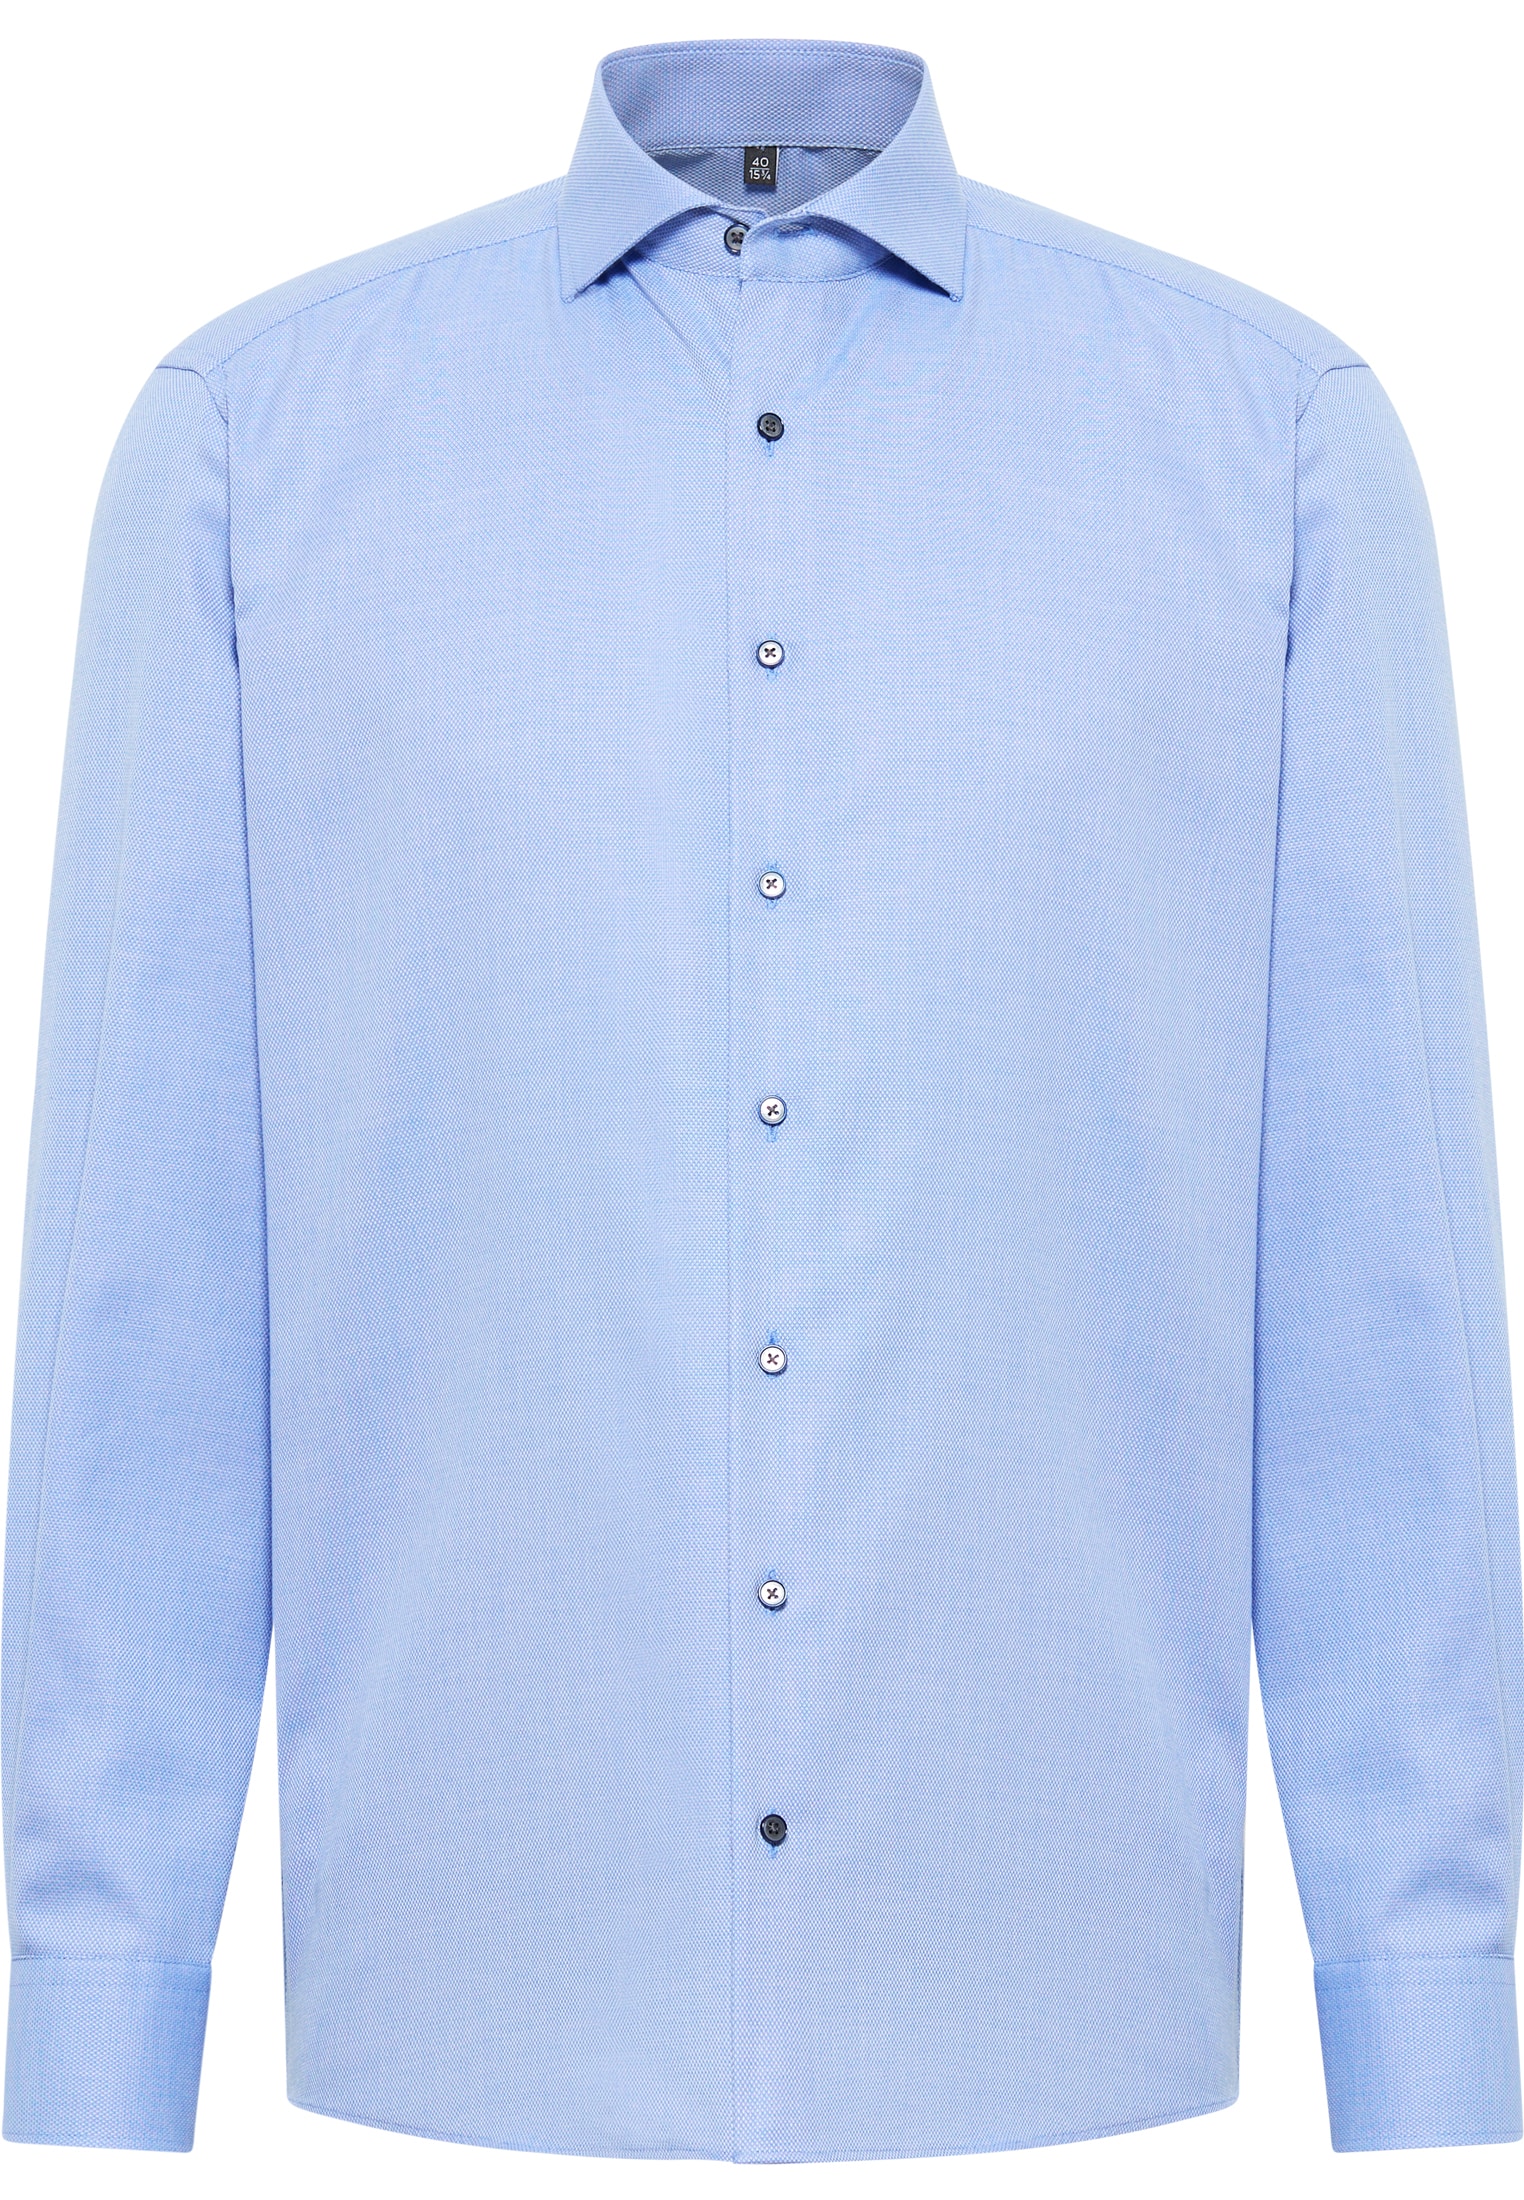 COMFORT FIT Shirt in blue structured